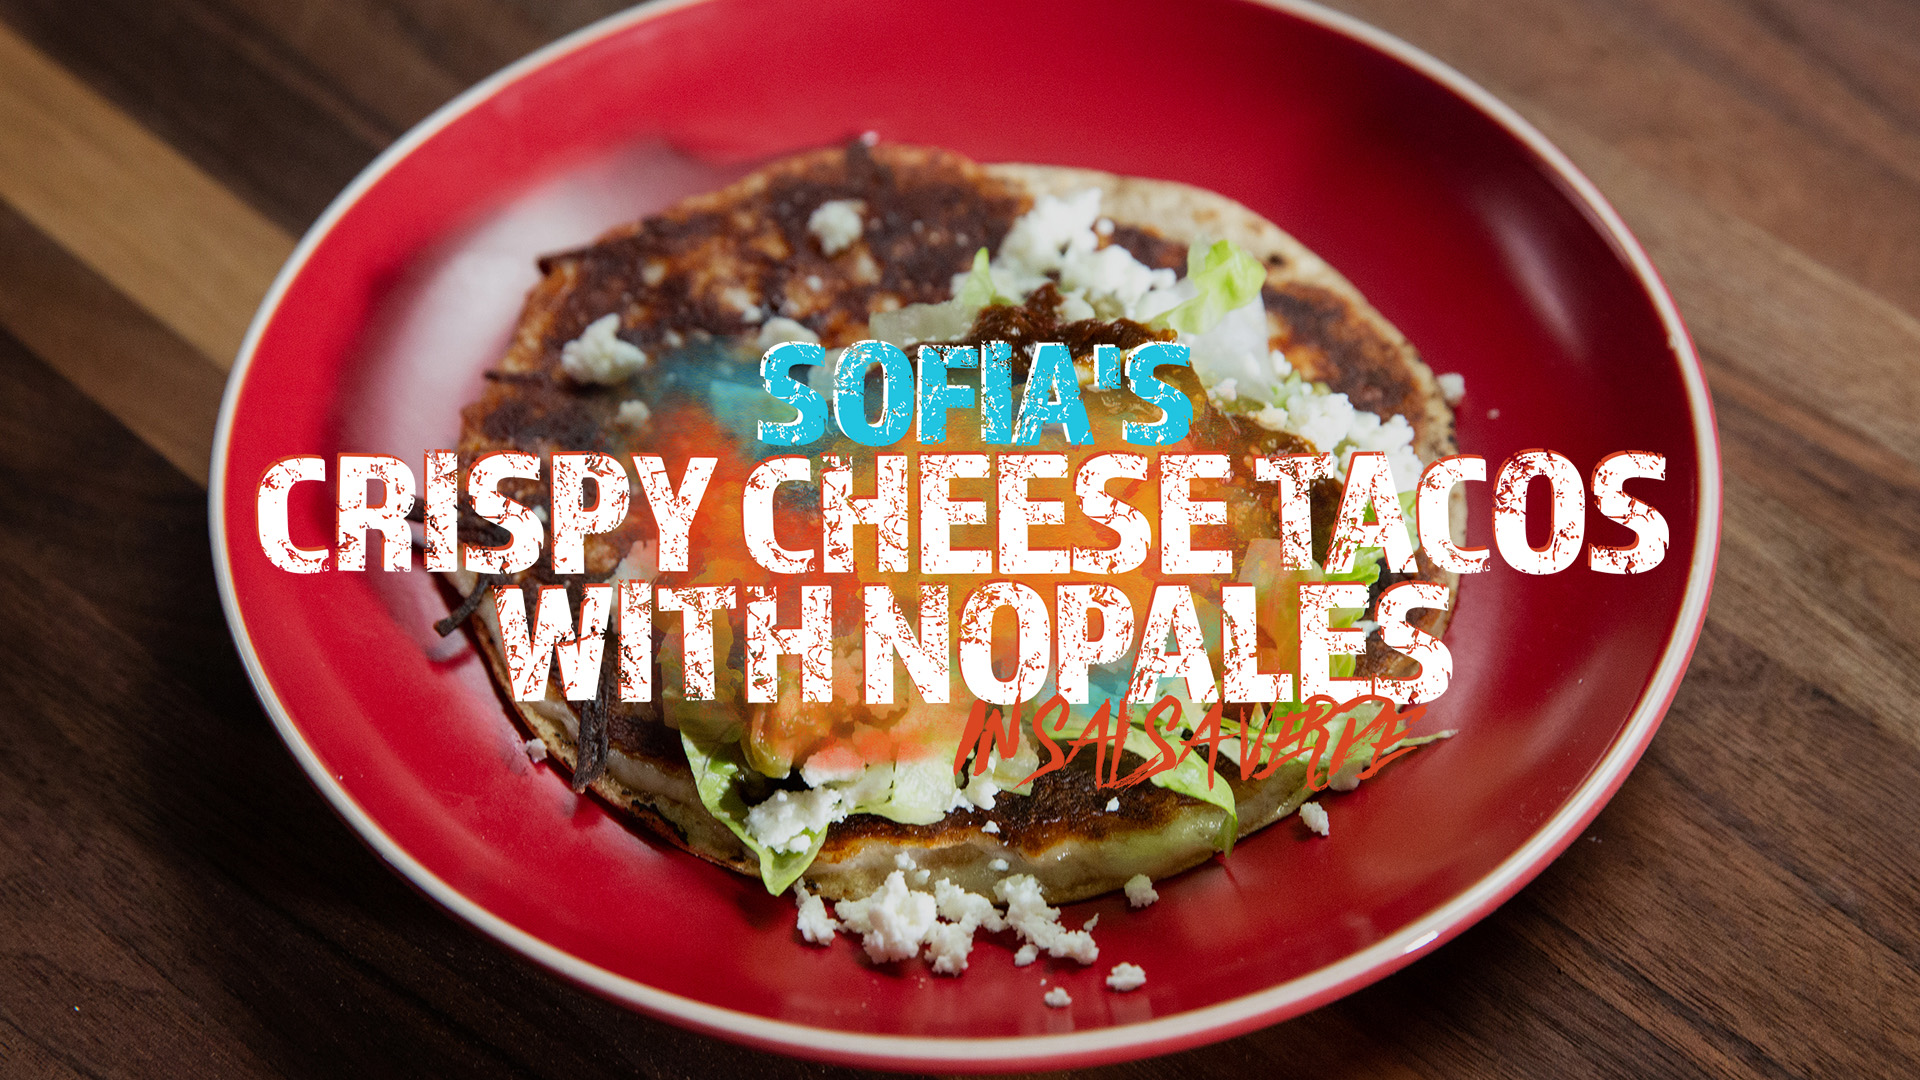 Sofia’s Crispy Cheese Tacos with Nopales in Salsa Verde